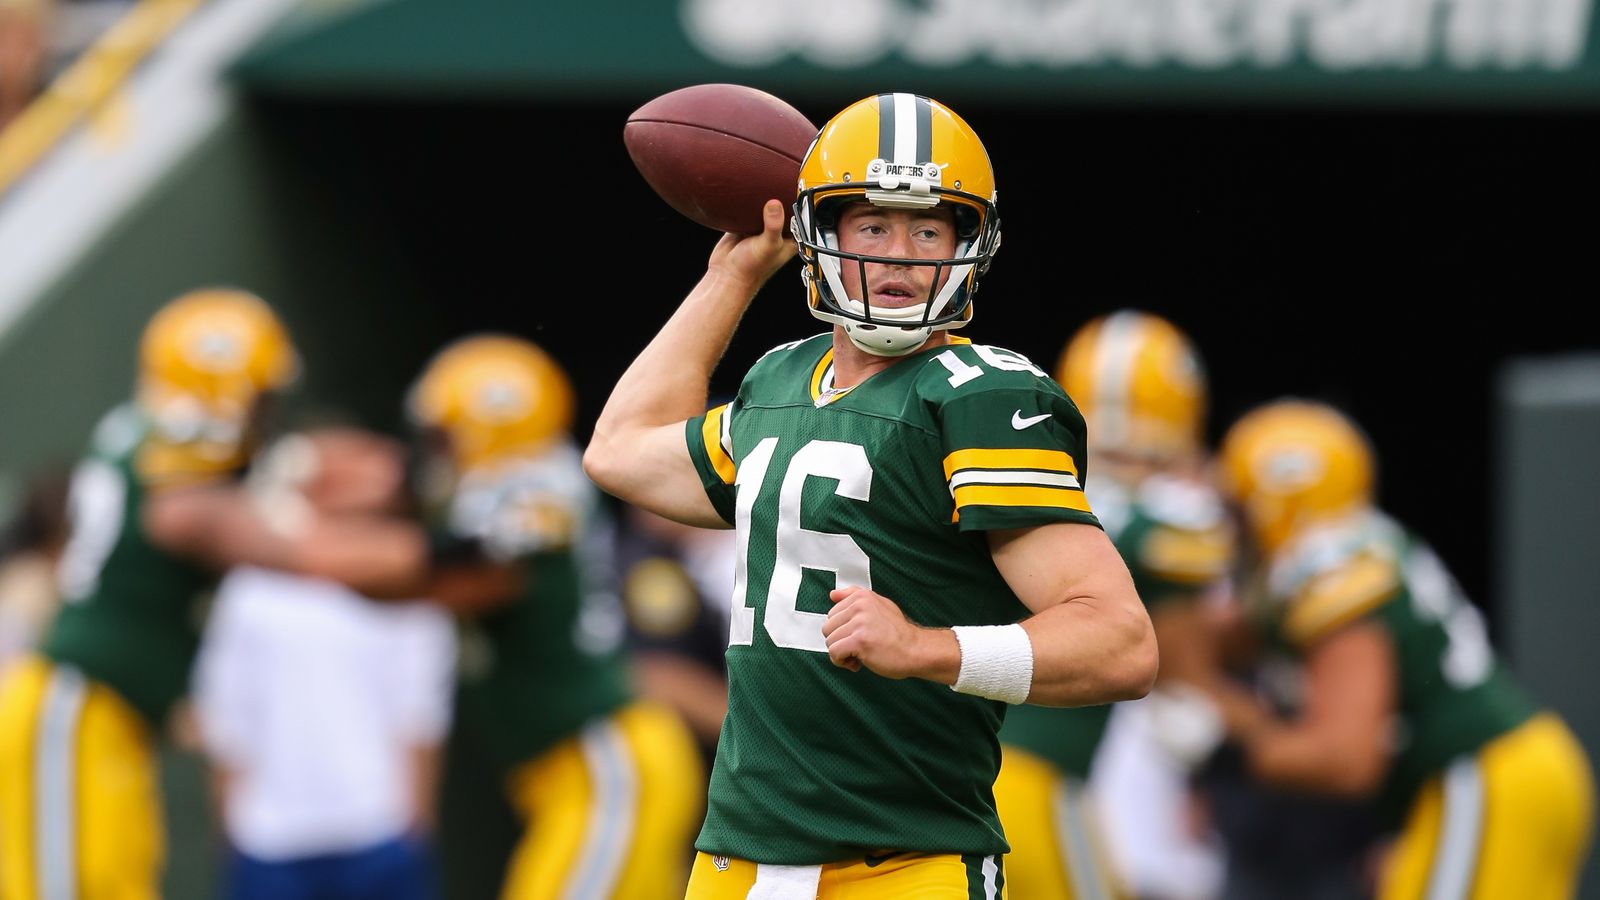 Free Agent to be Scott Tolzien Hoping for a Starting Quarterback Job